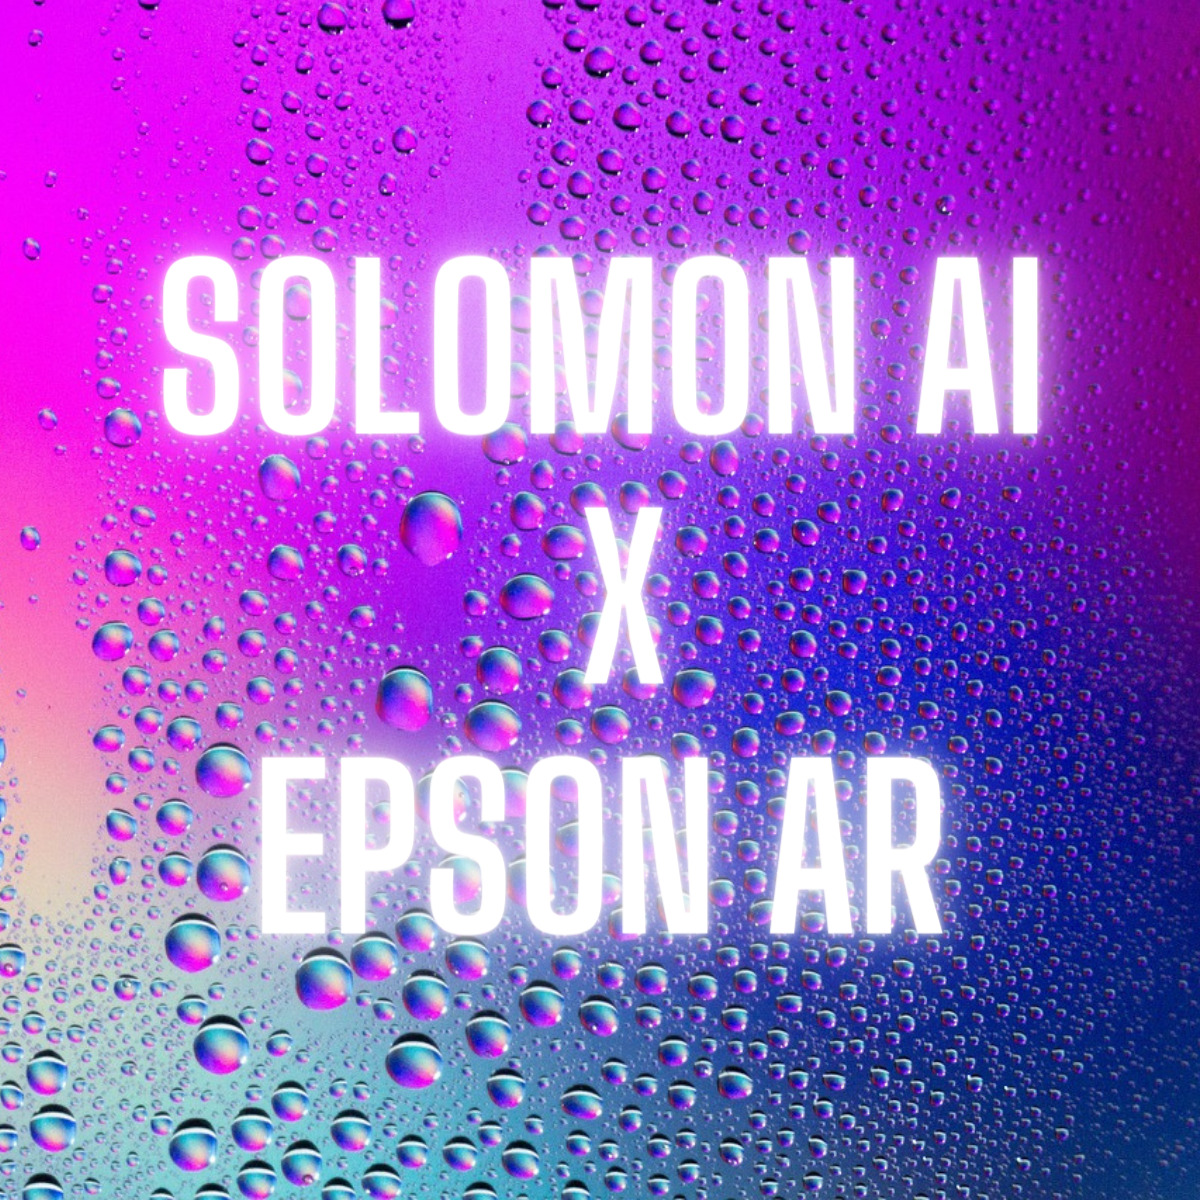 graphic with the text 'Solomon AI x Epson AR'